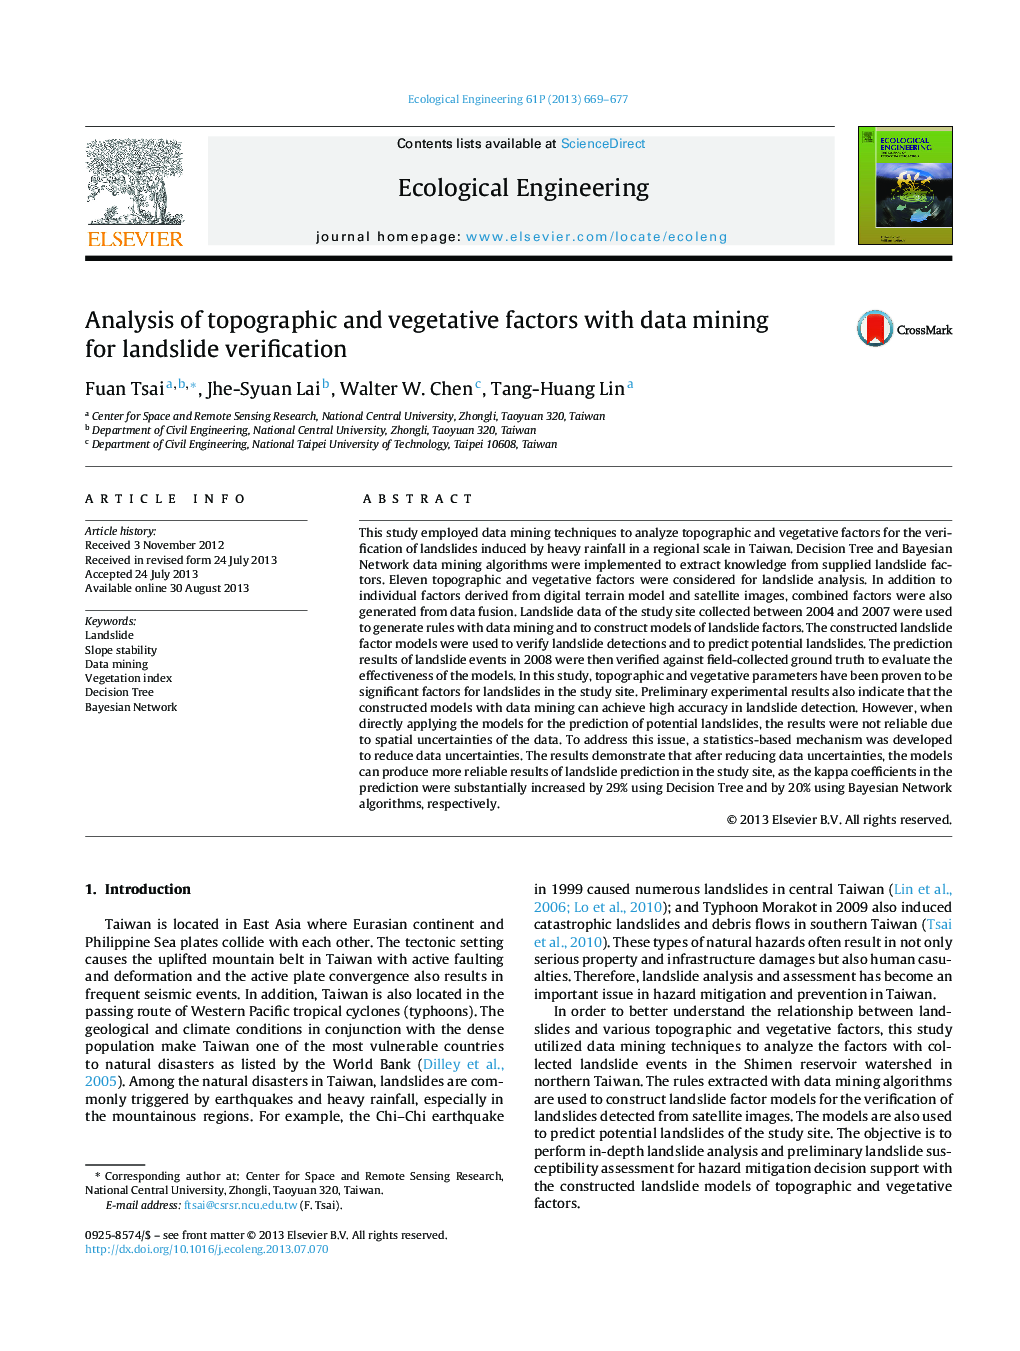 Analysis of topographic and vegetative factors with data mining for landslide verification